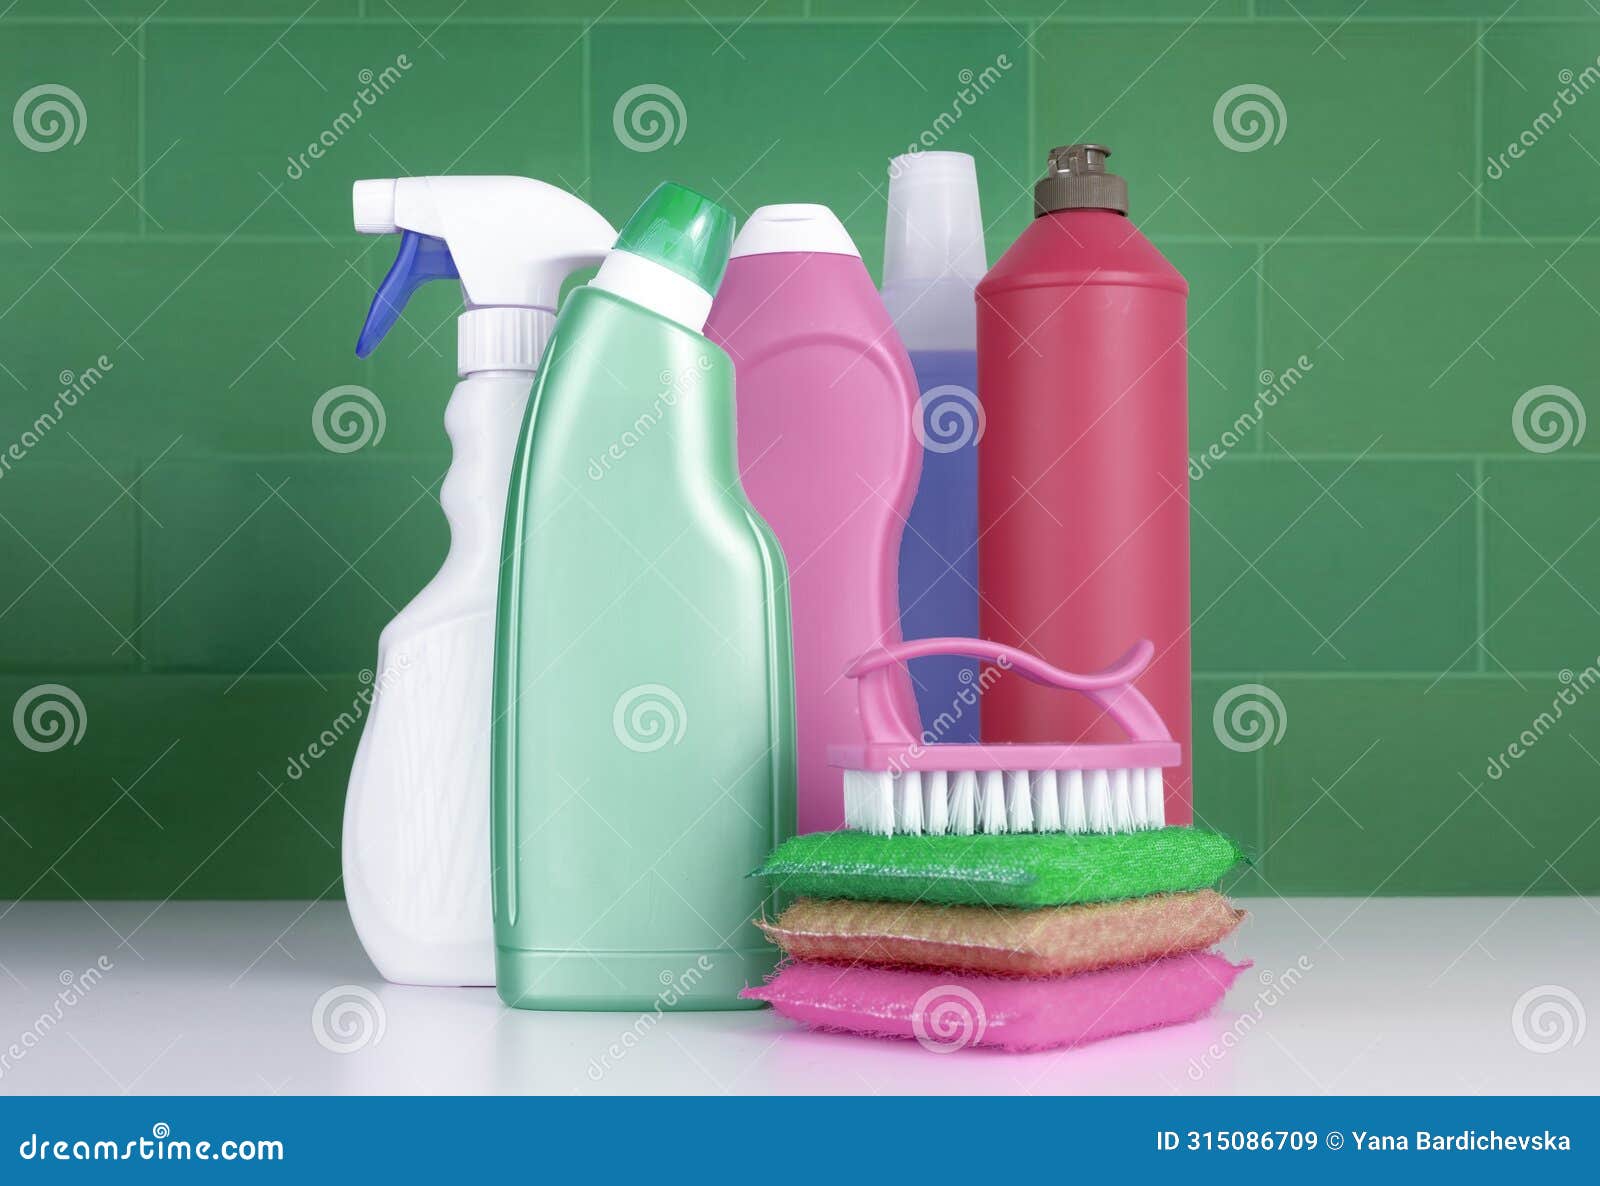 sanitary items,cleaners.colorful plastic sanitizing bottles.desinfectants